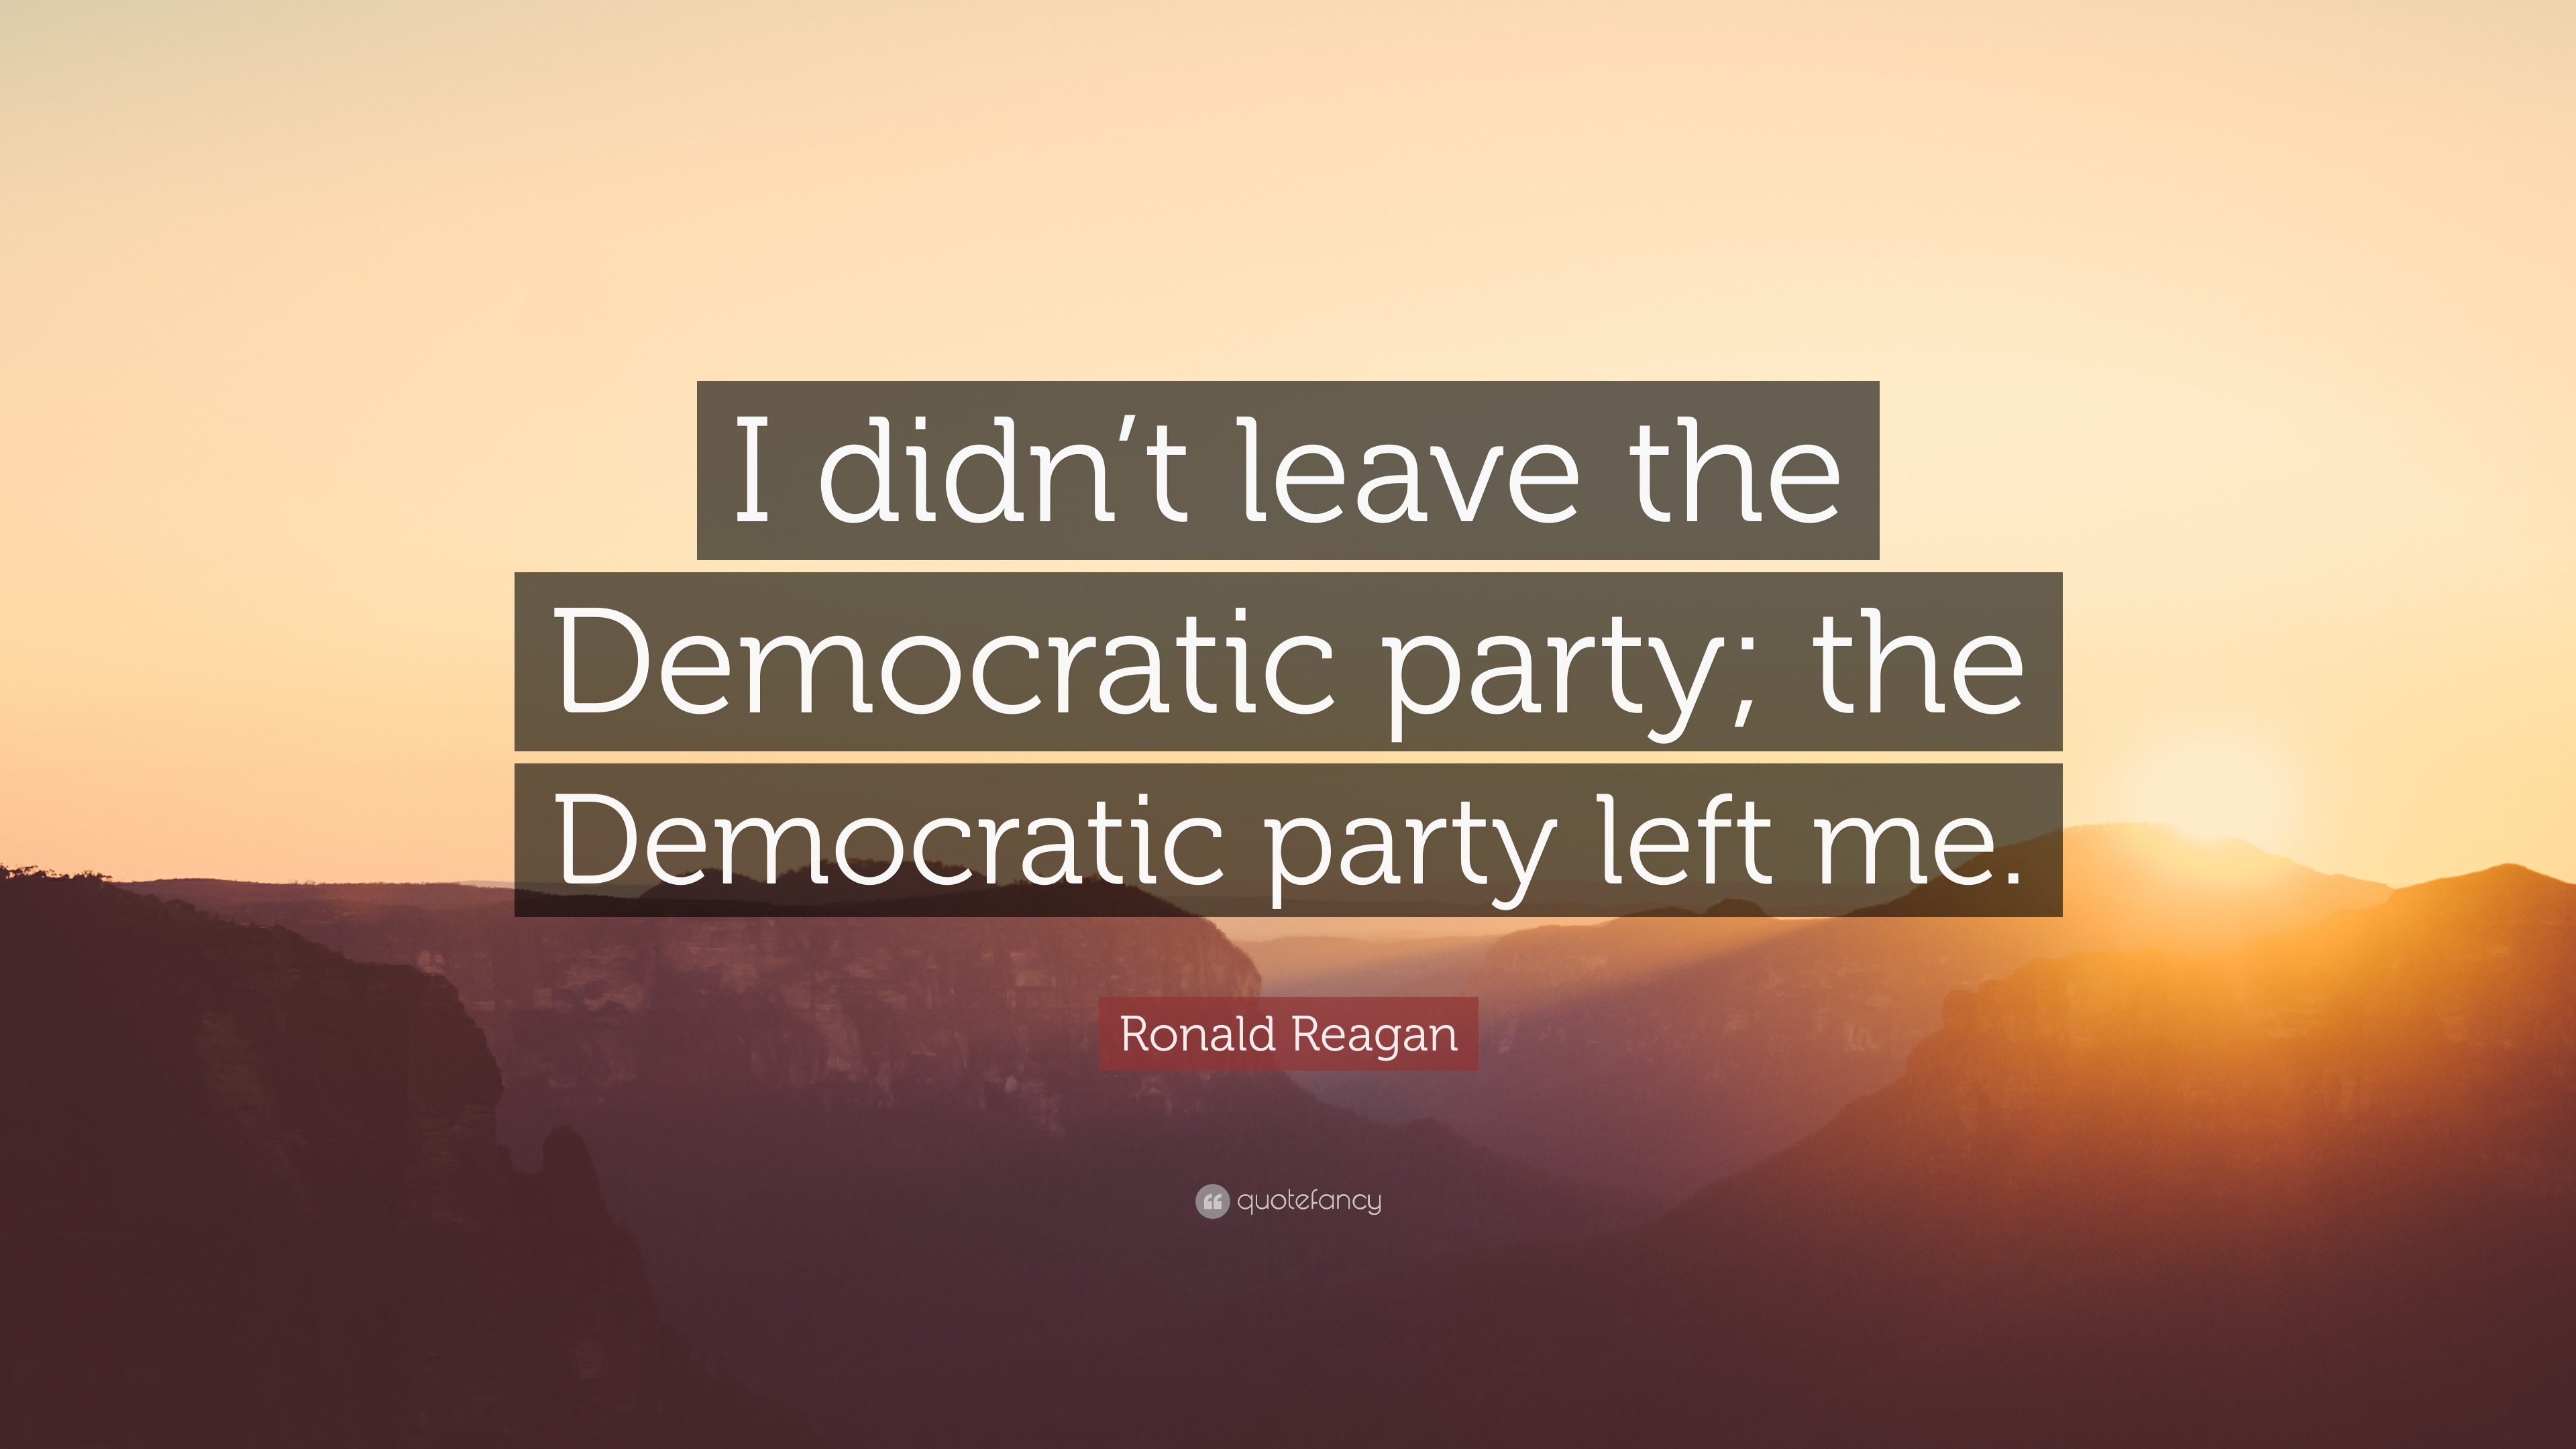 Ronald Reagan Quote “I didn’t leave the Democratic party